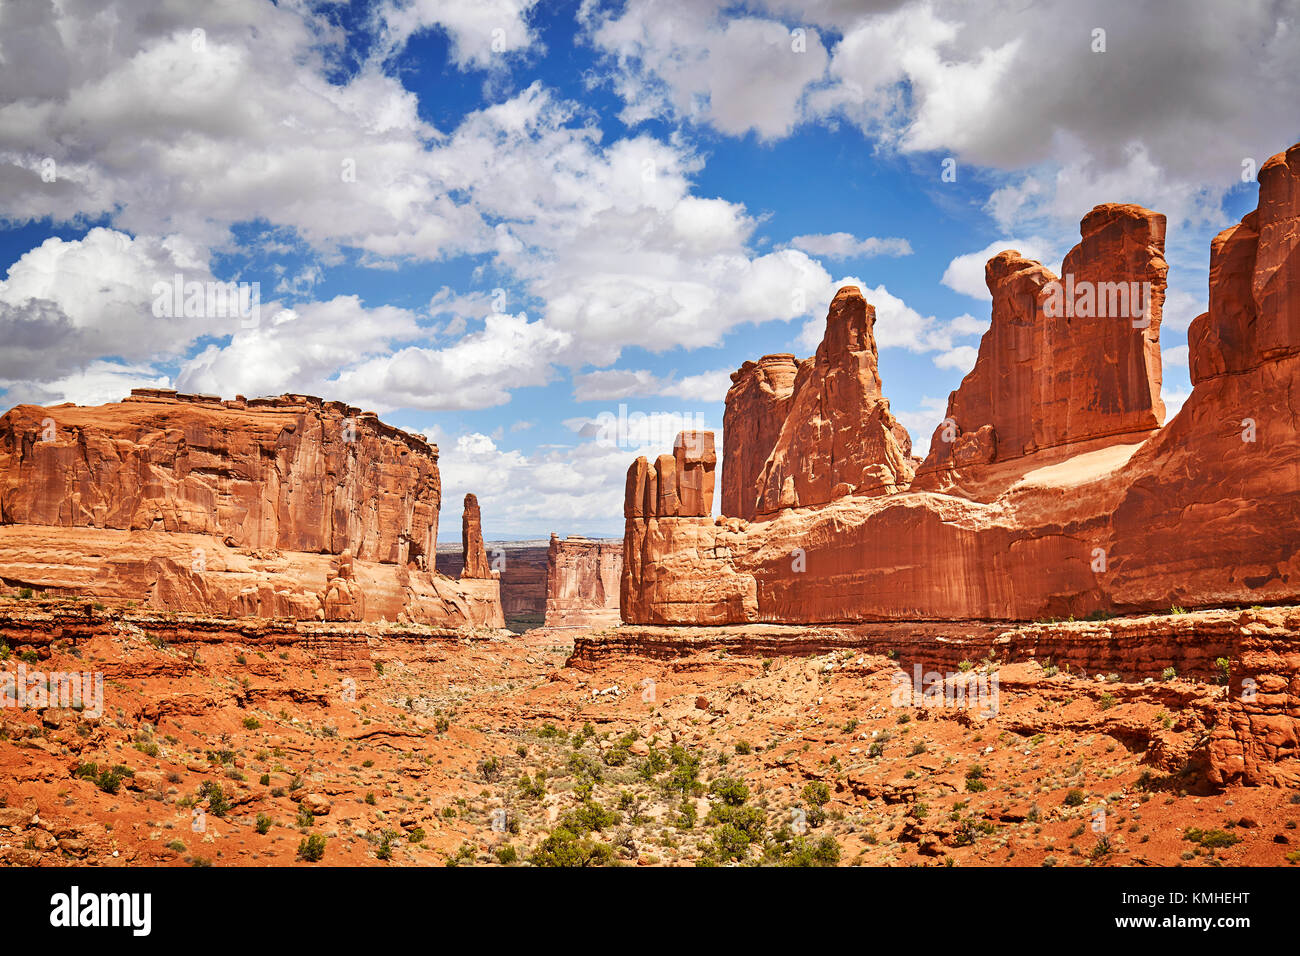 Park Avenue Trail view in Arches National Park, Utah, USA. Stock Photo